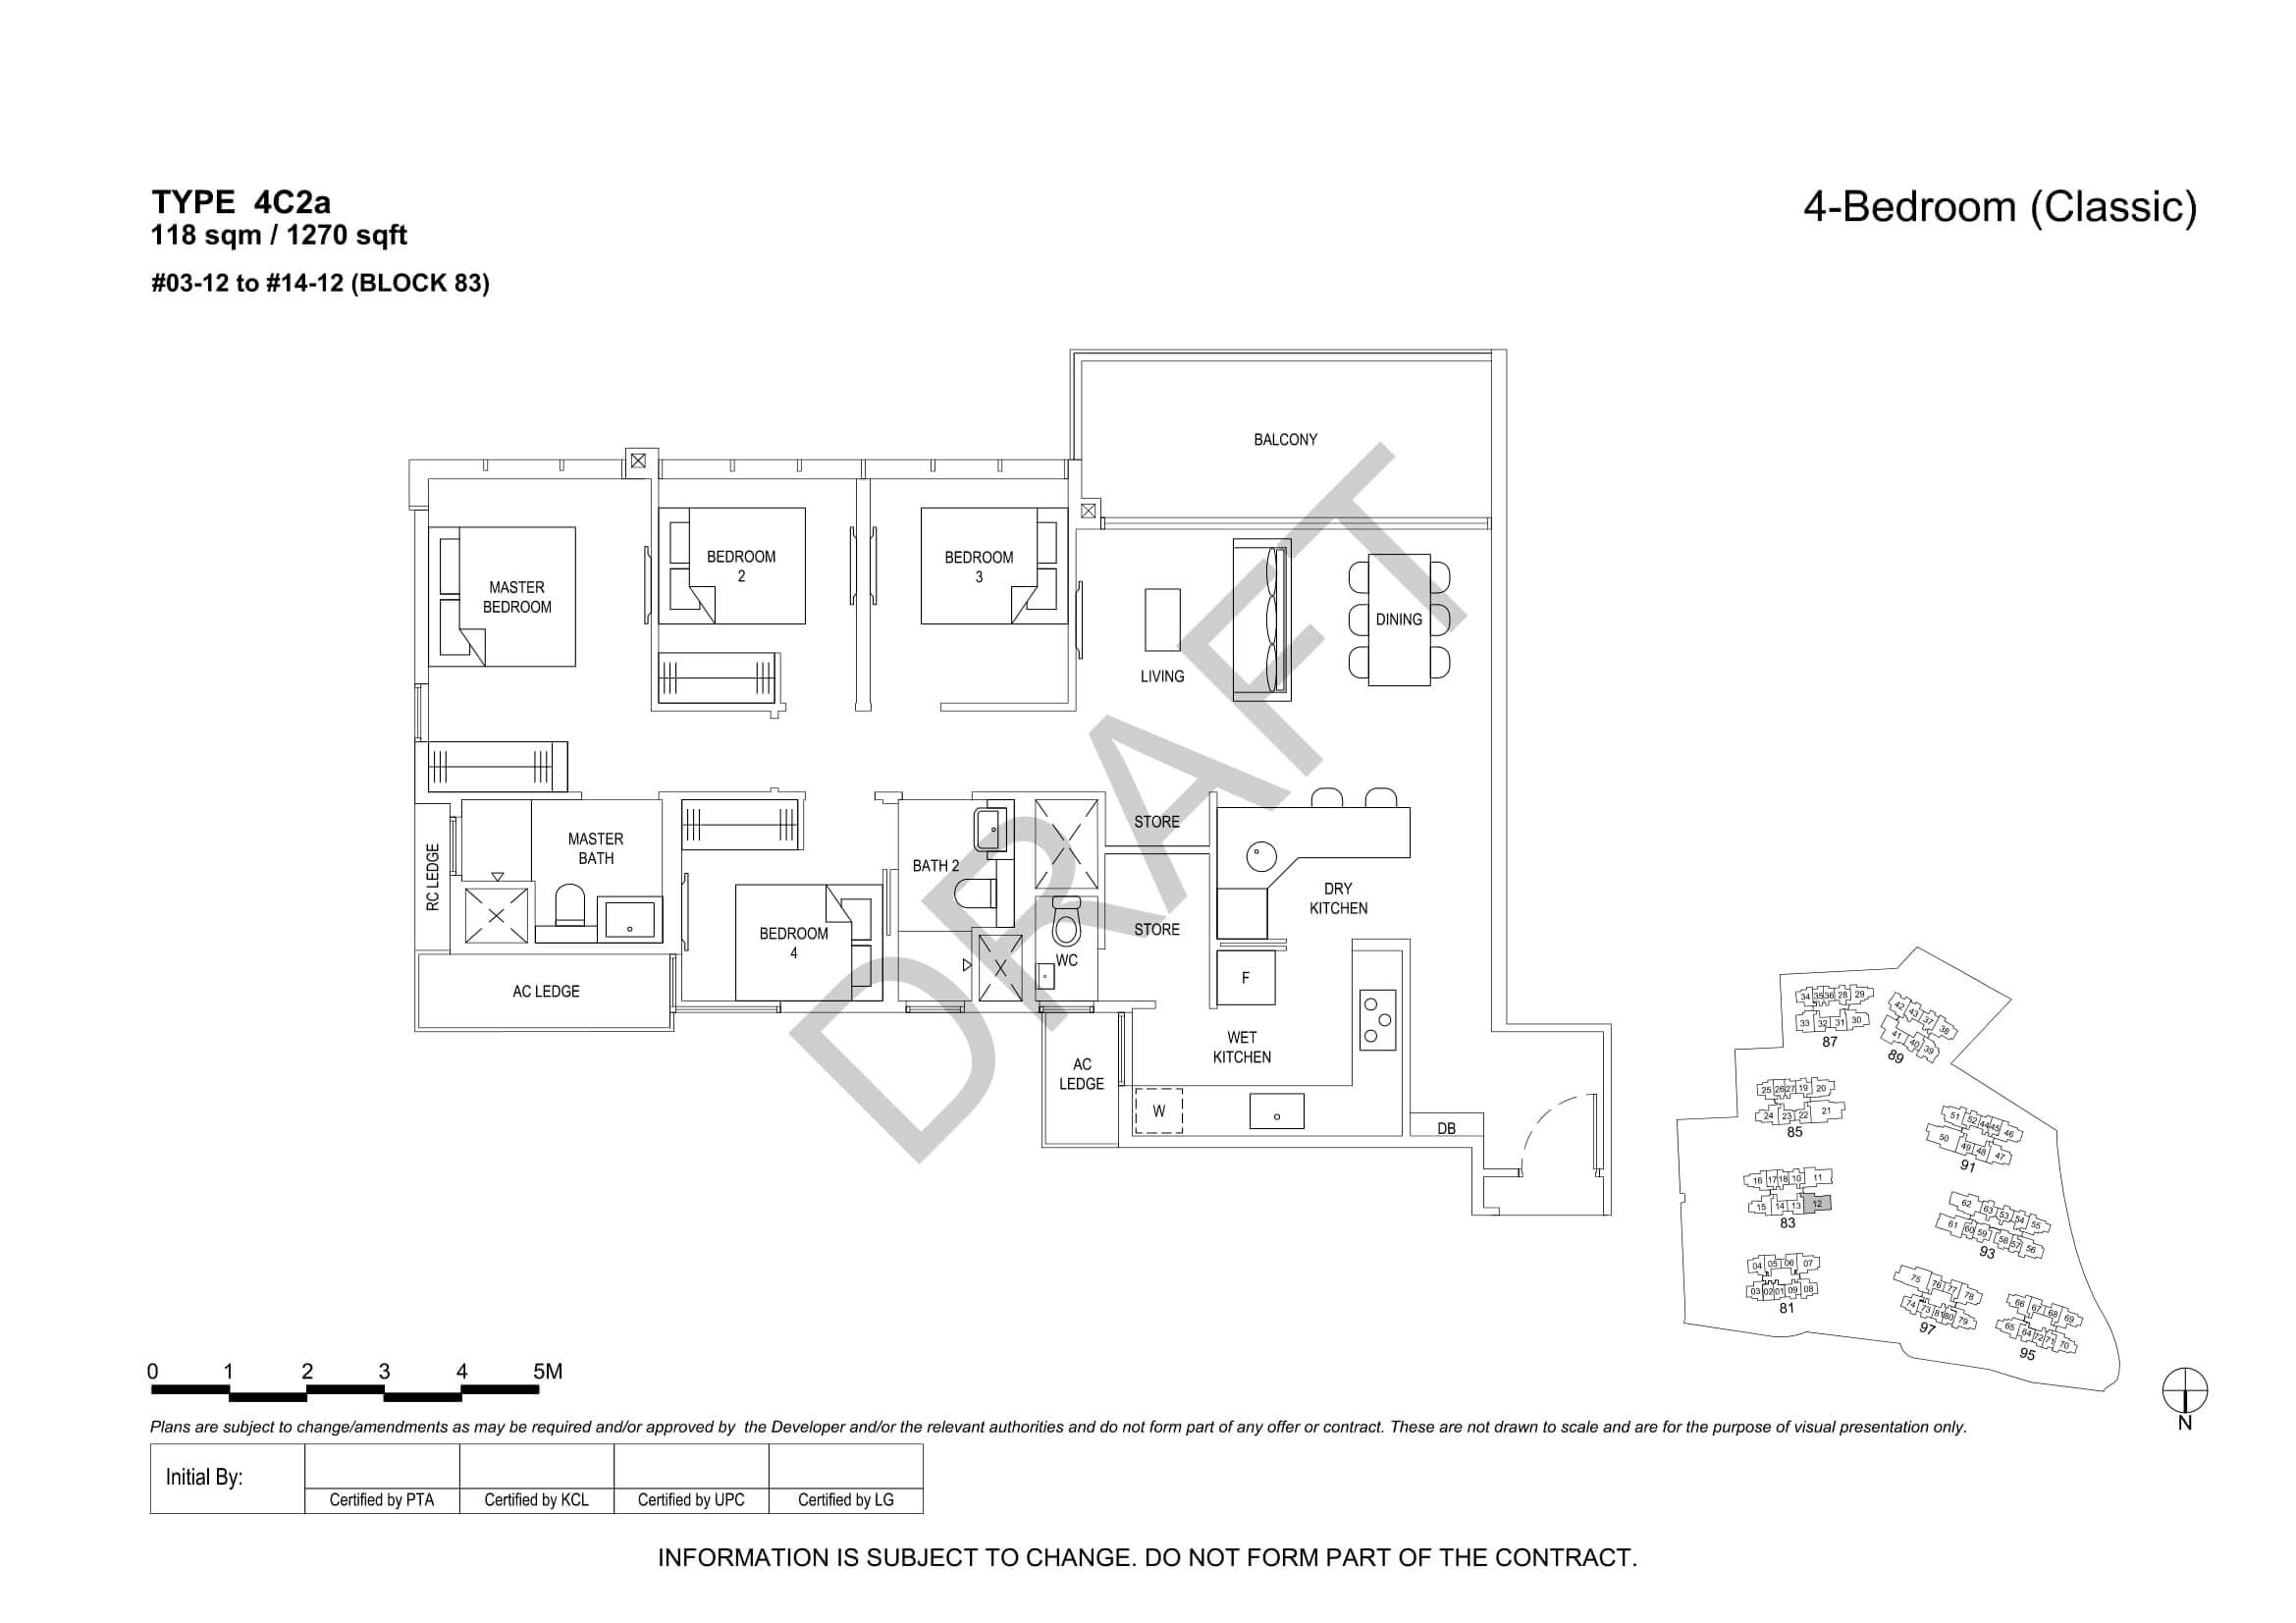 The Florence Residences Floor Plan 4-Bedroom Type 4C2a